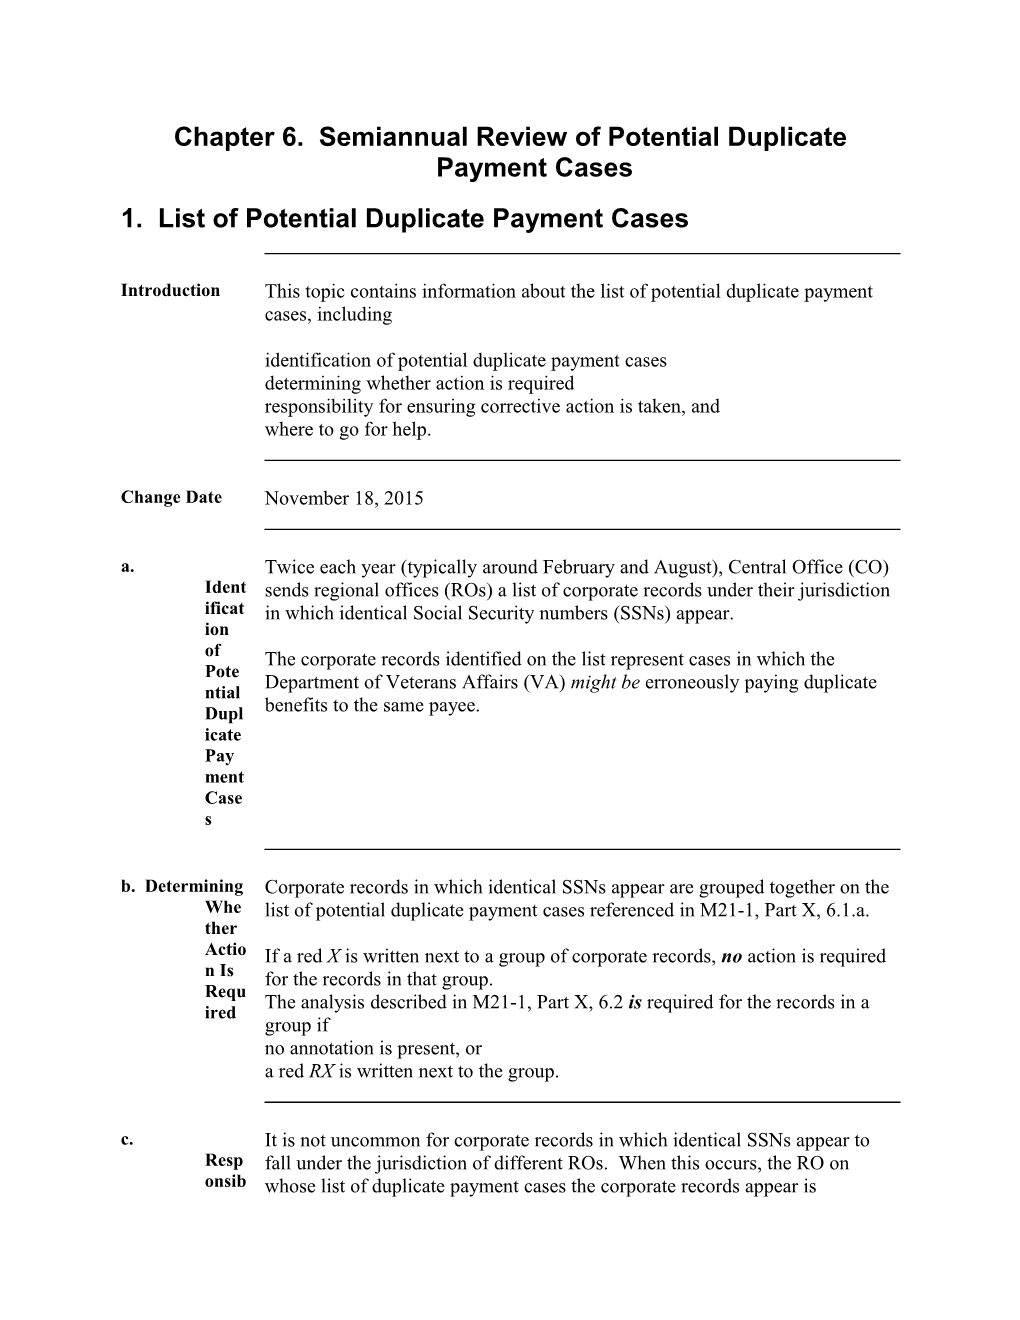 Chapter 6. Semiannual Review of Potential Duplicate Payment Cases